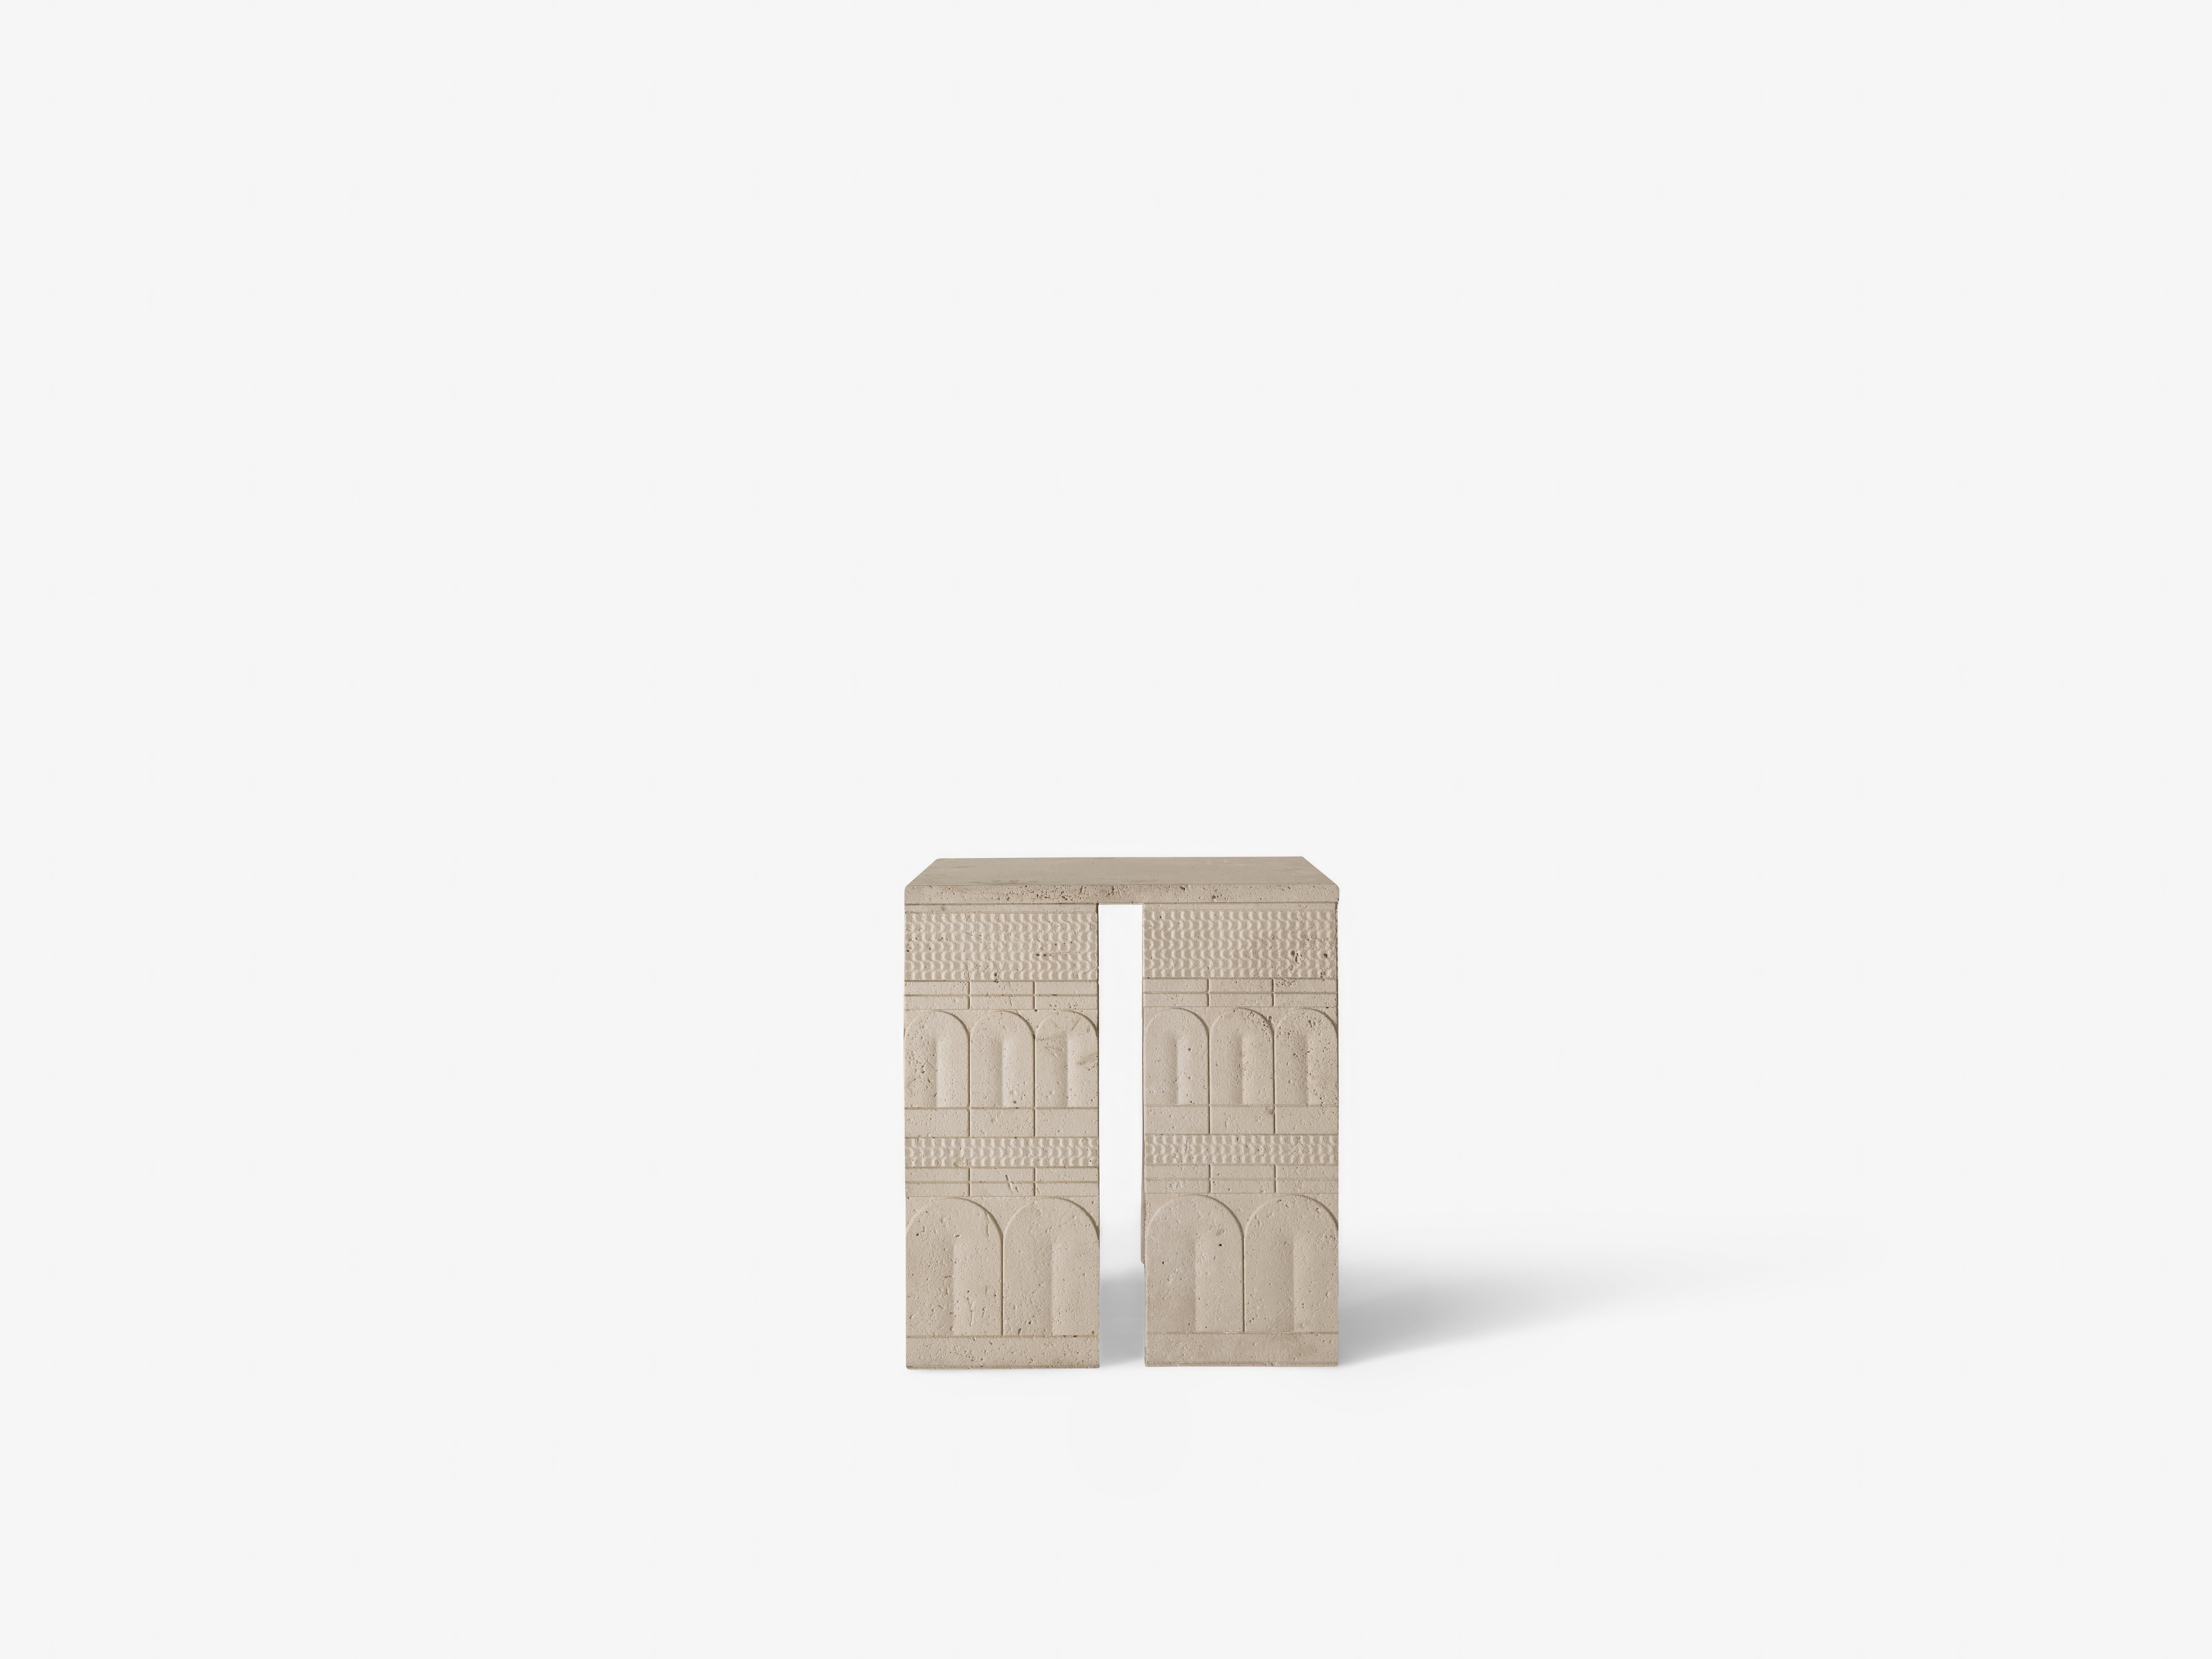 Landin Side Table by OHLA STUDIO
Dimensions: D 45 x W 45 x H 50 cm 
Materials: Travertine de Veracruz.
80 kg

This collection draws upon the earliest known works of representational art. From crude symbols painstakingly chipped into cave walls,